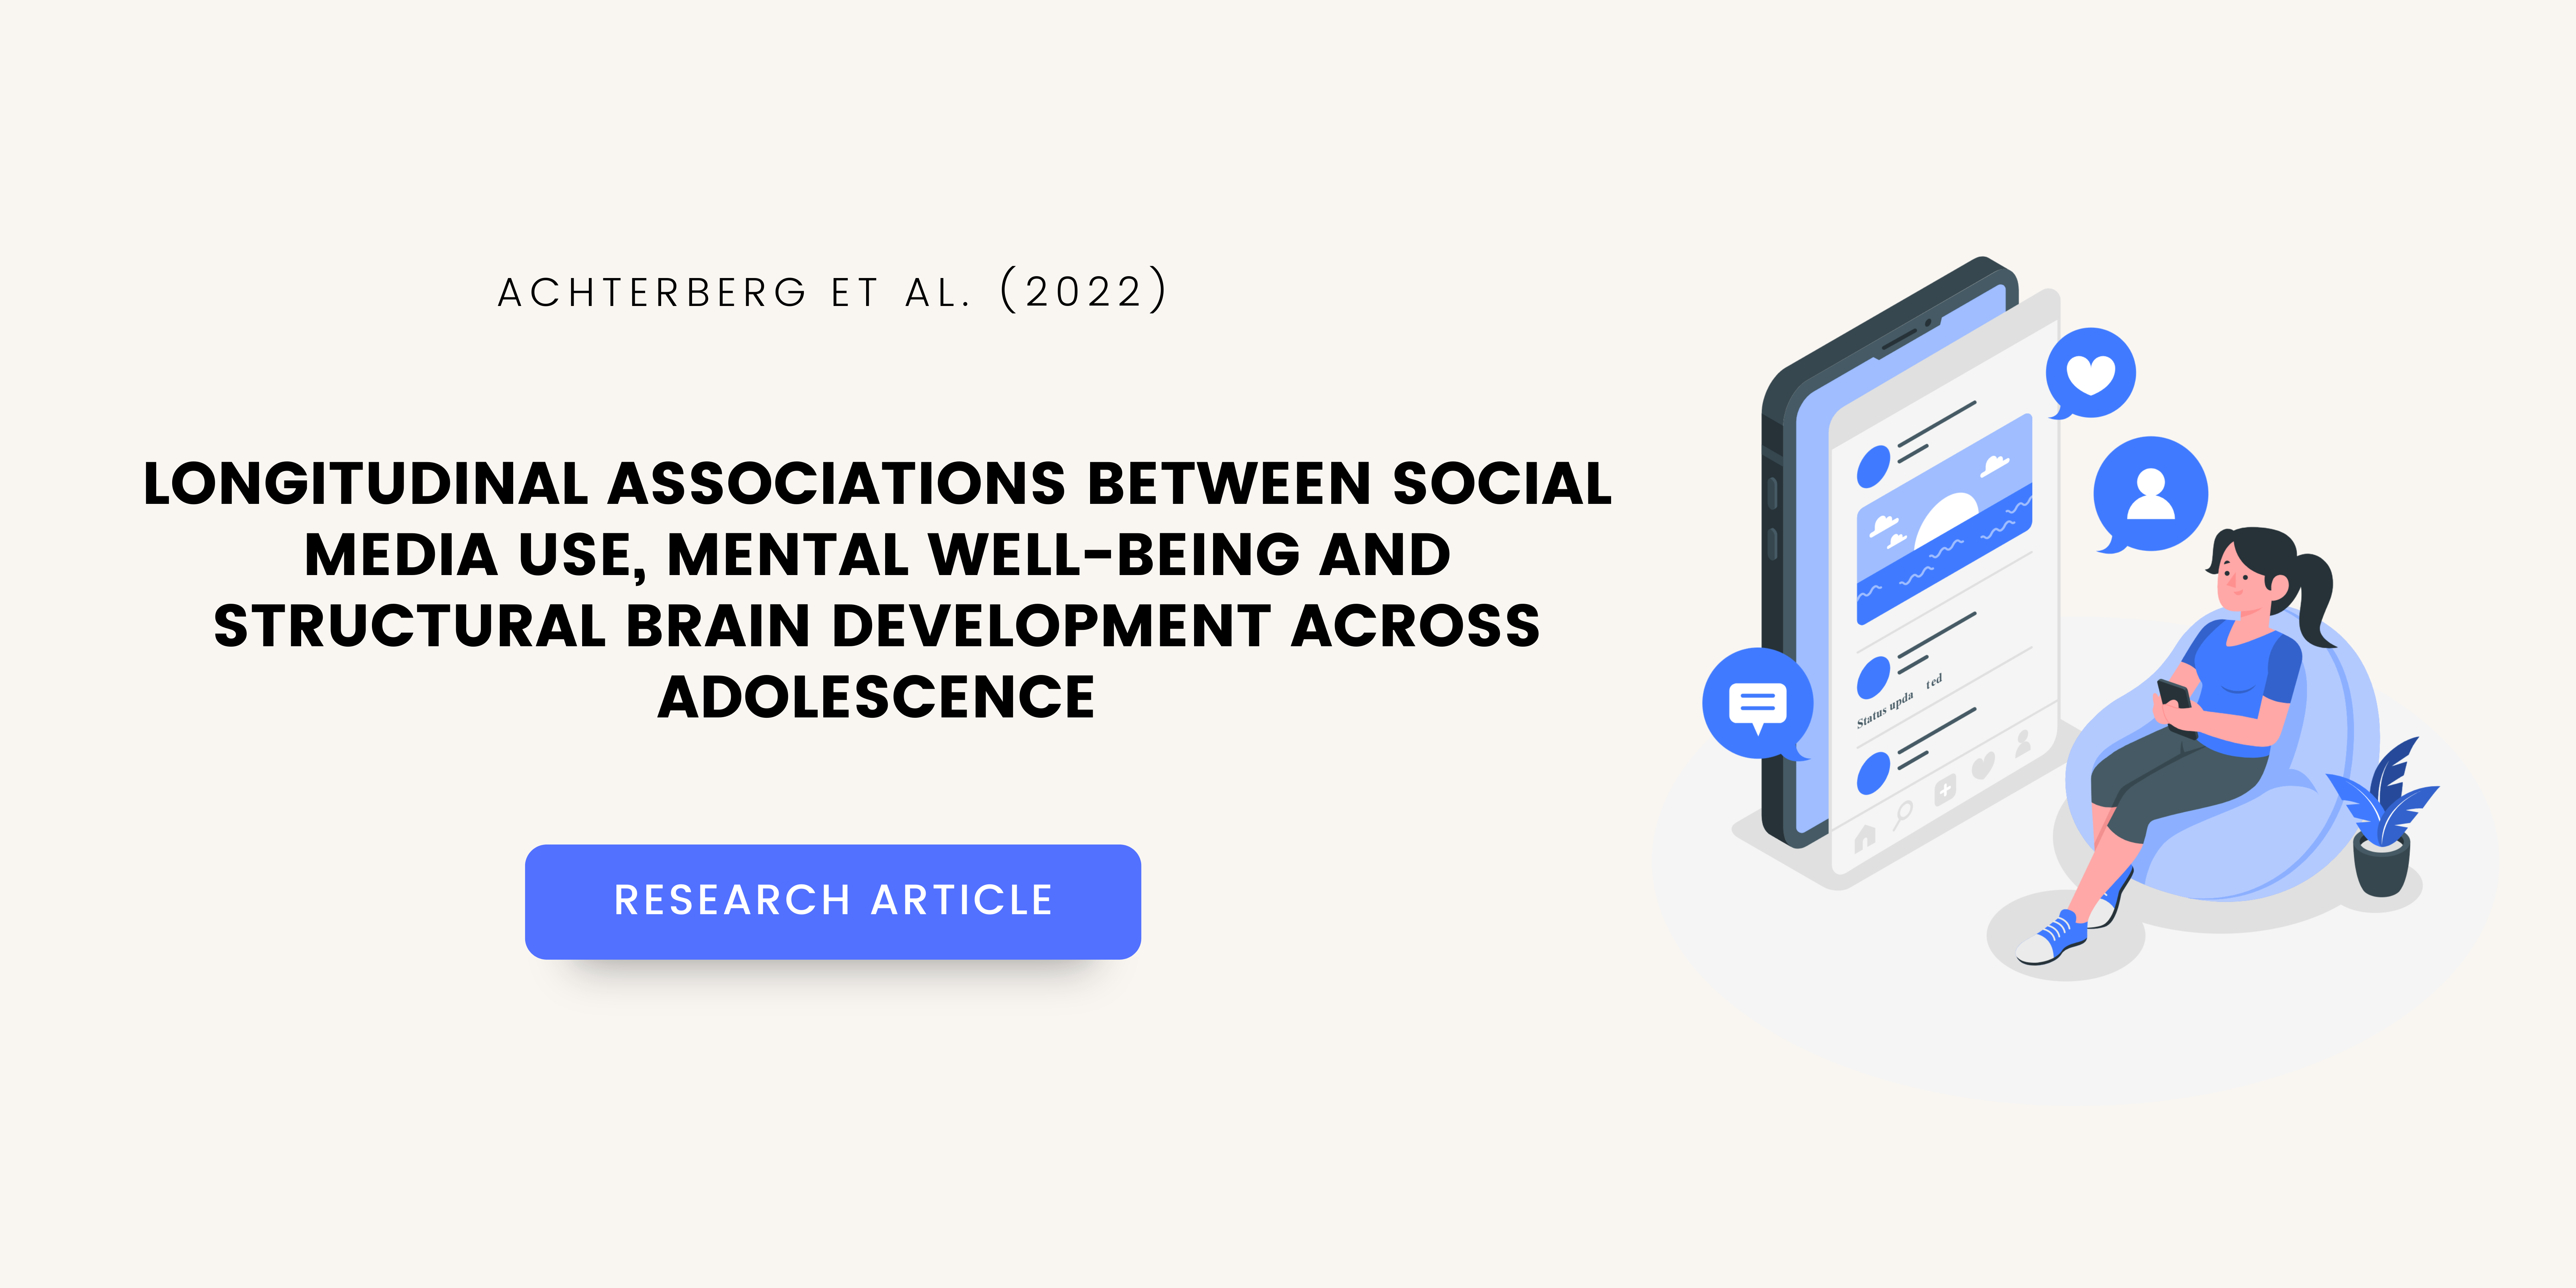 Longitudinal associations between social media use, mental well-being and structural brain development across adolescence